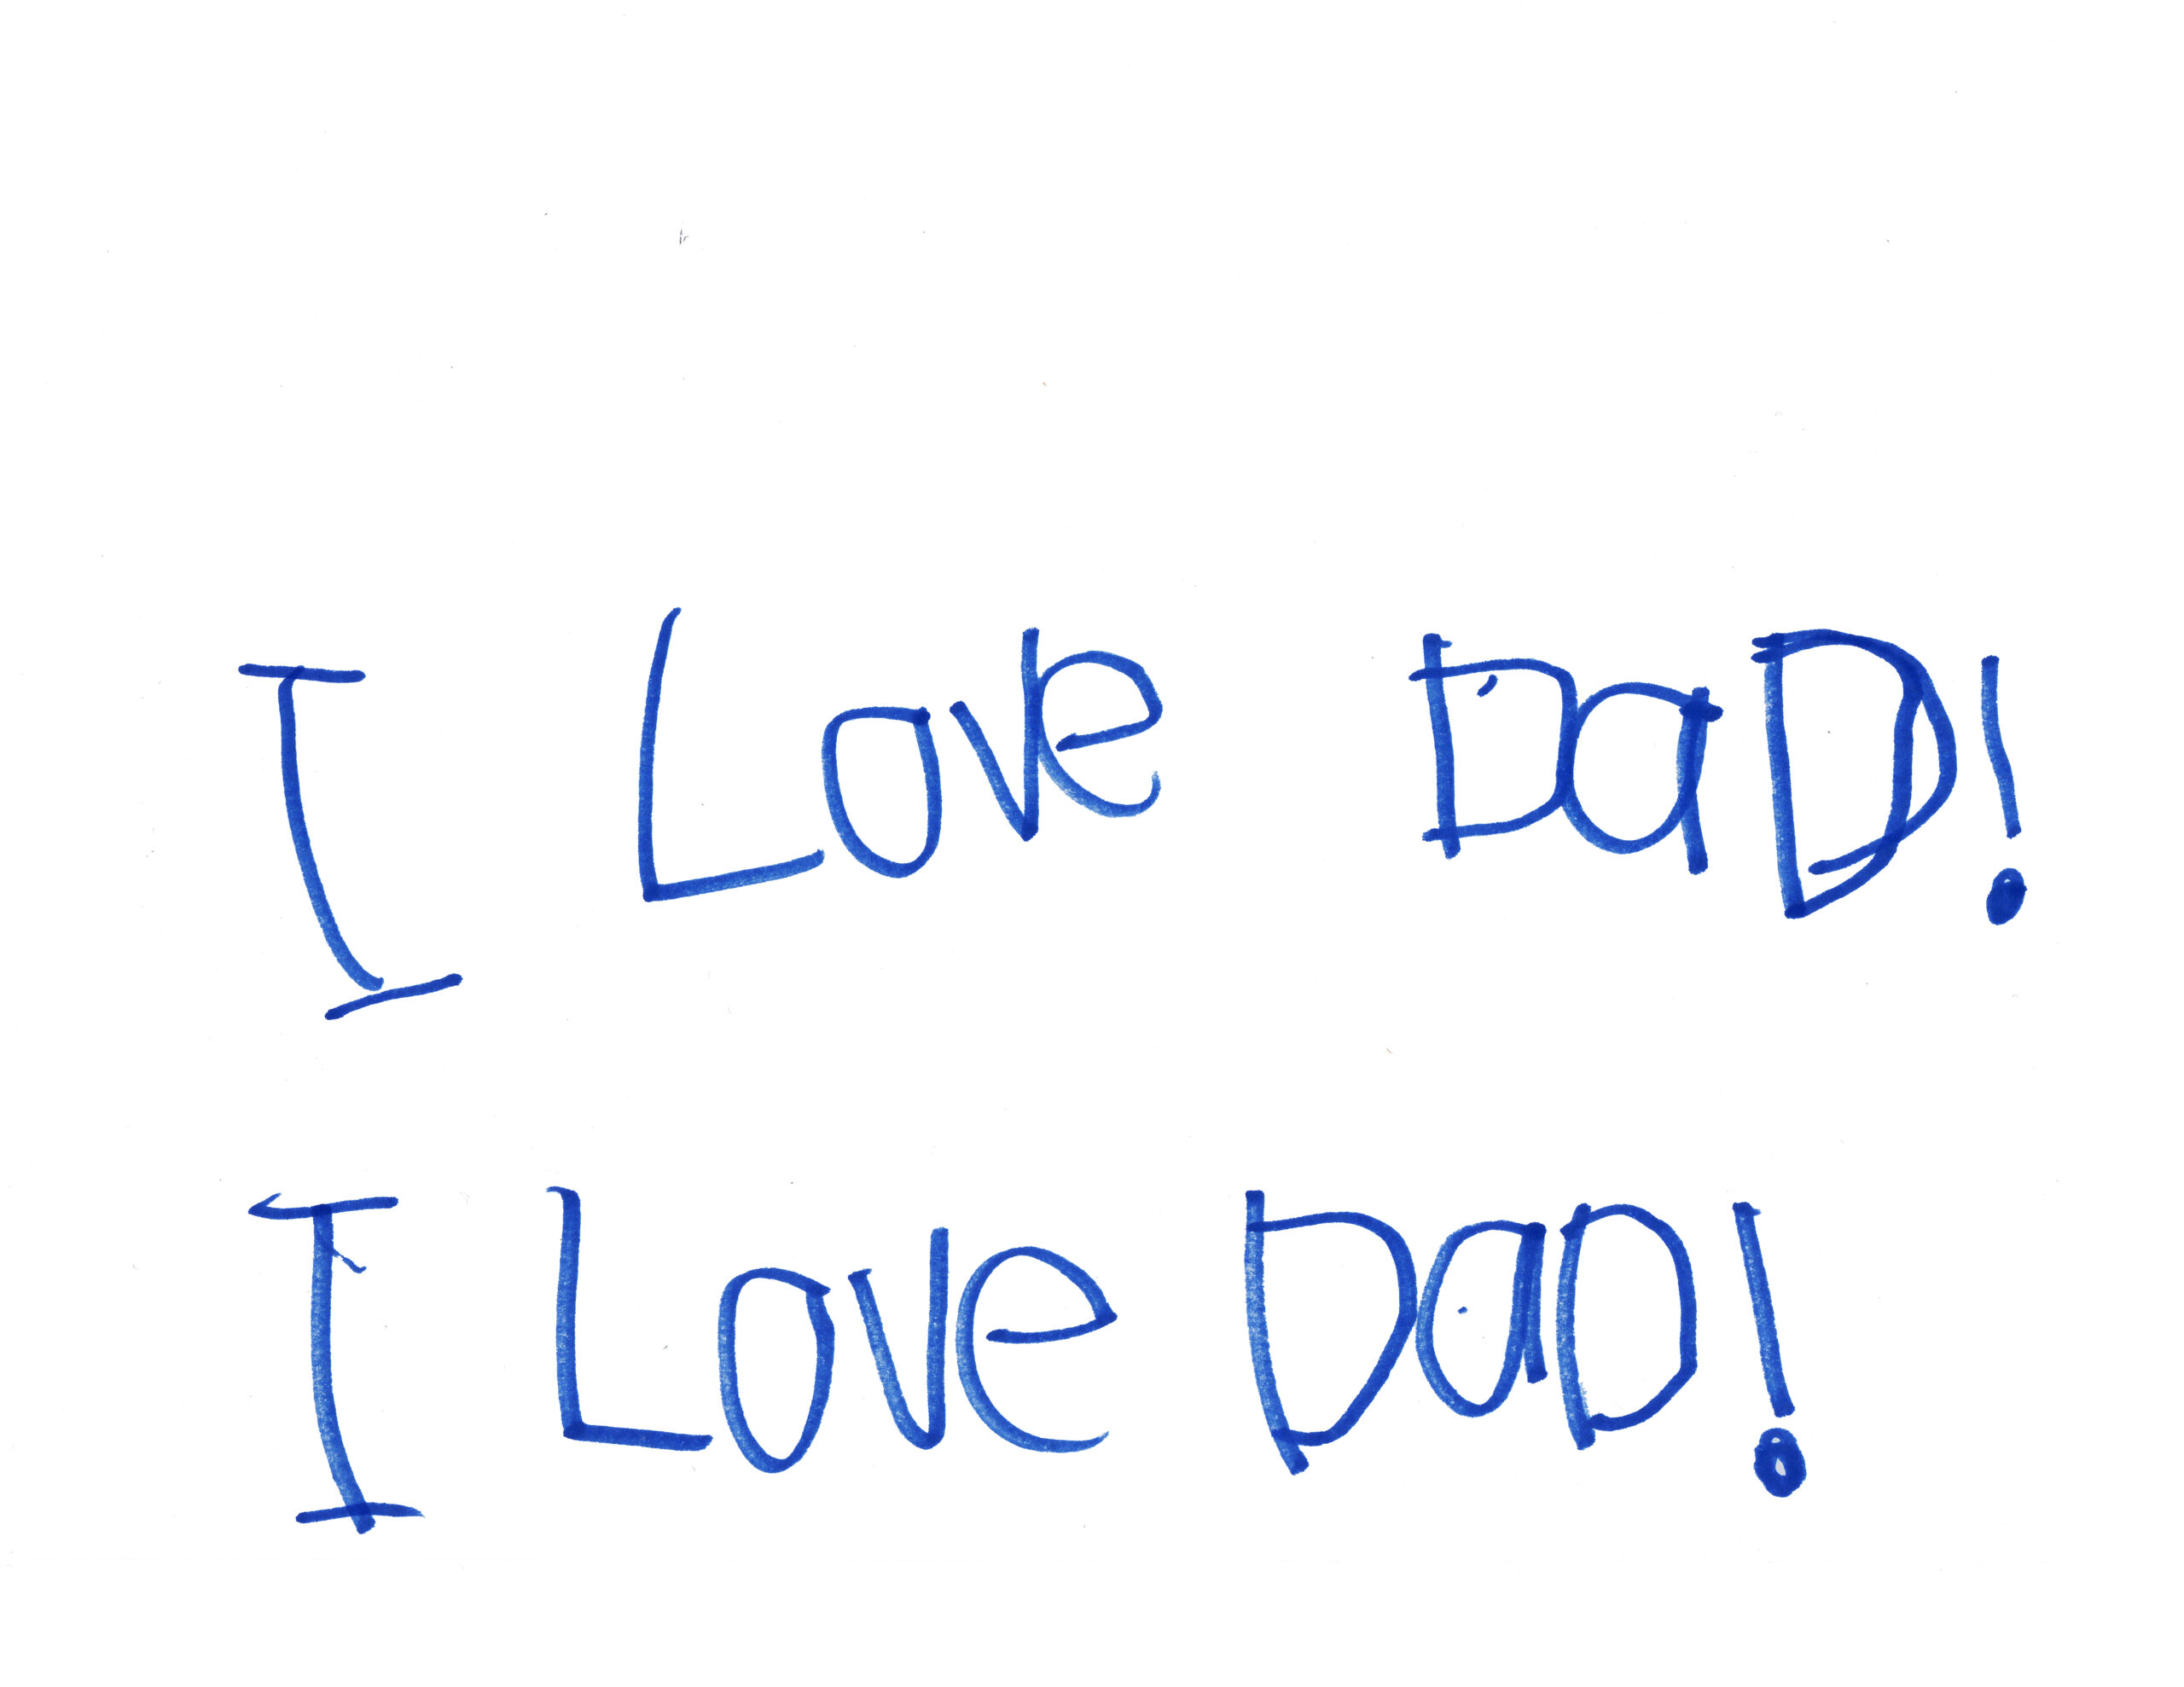 I Love You Dad! I Love You Dad!